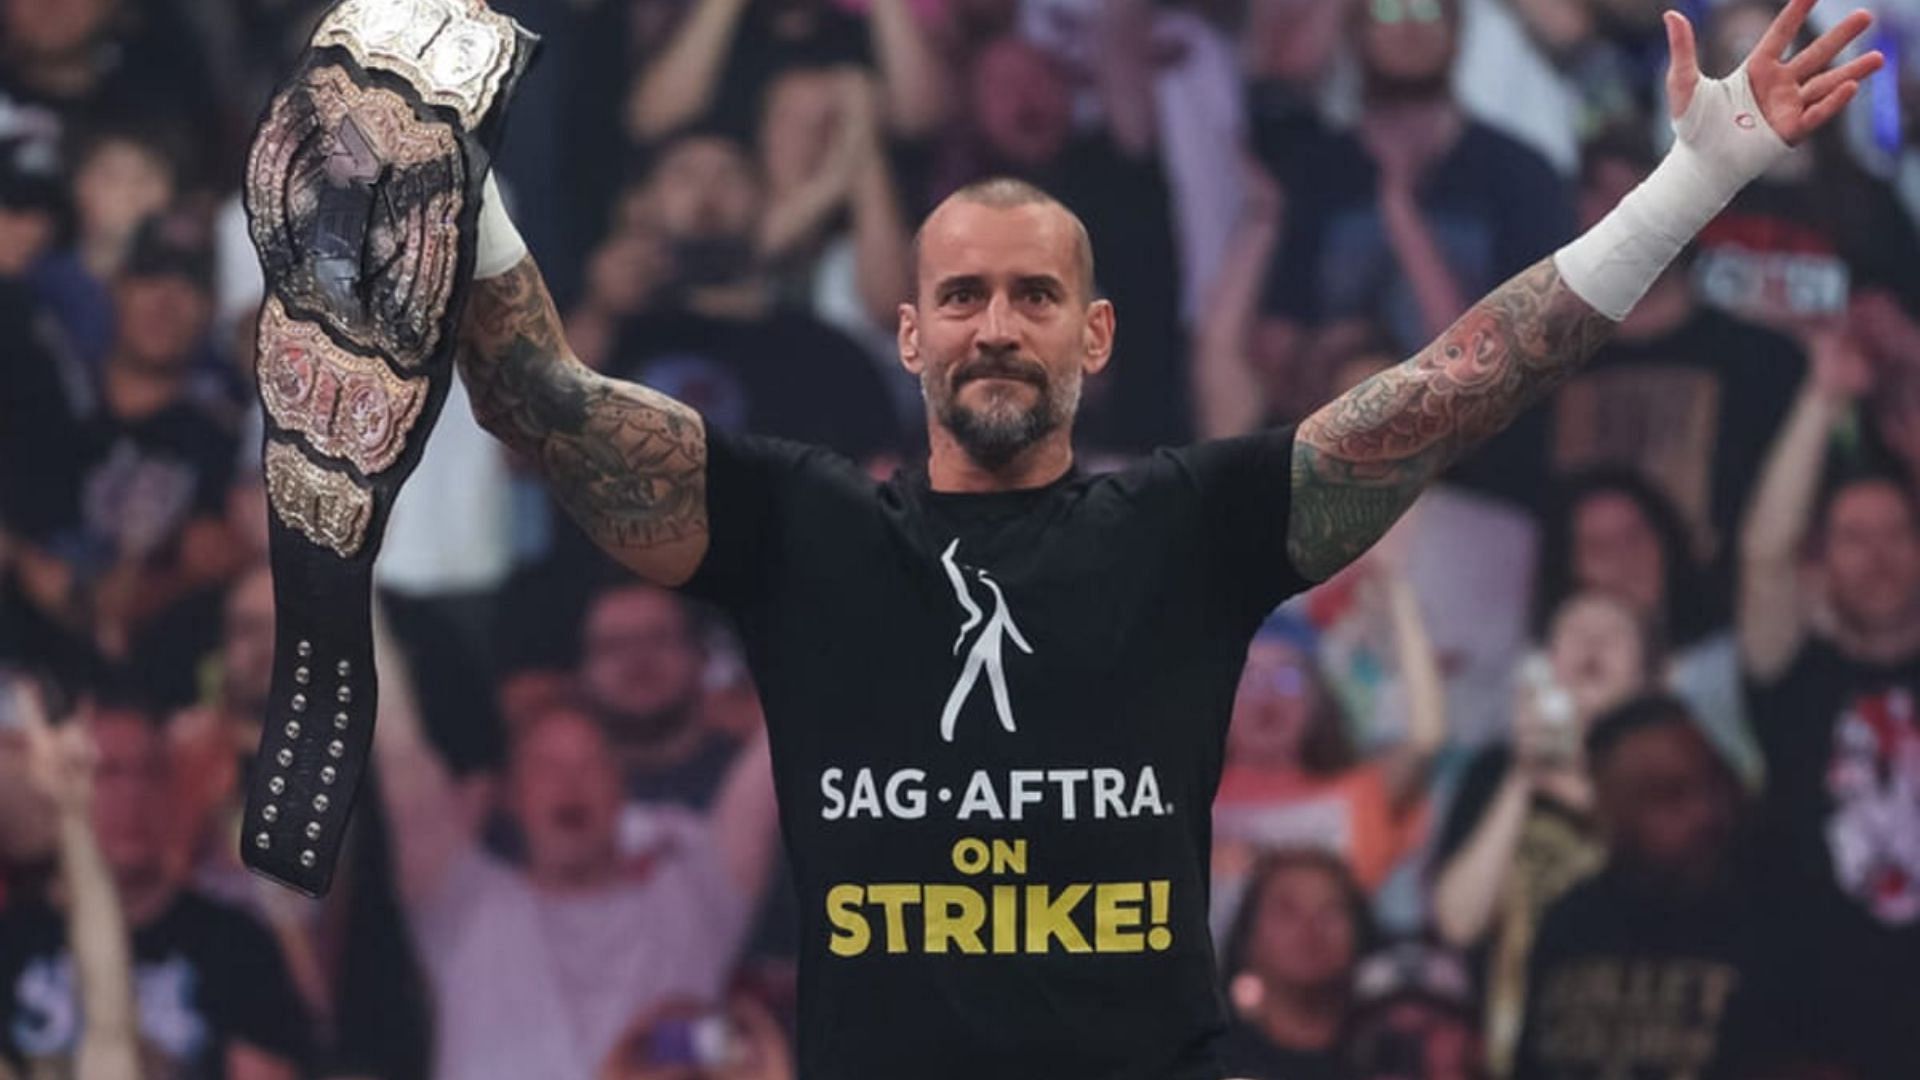 Did CM Punk only priorotize himself across his career?